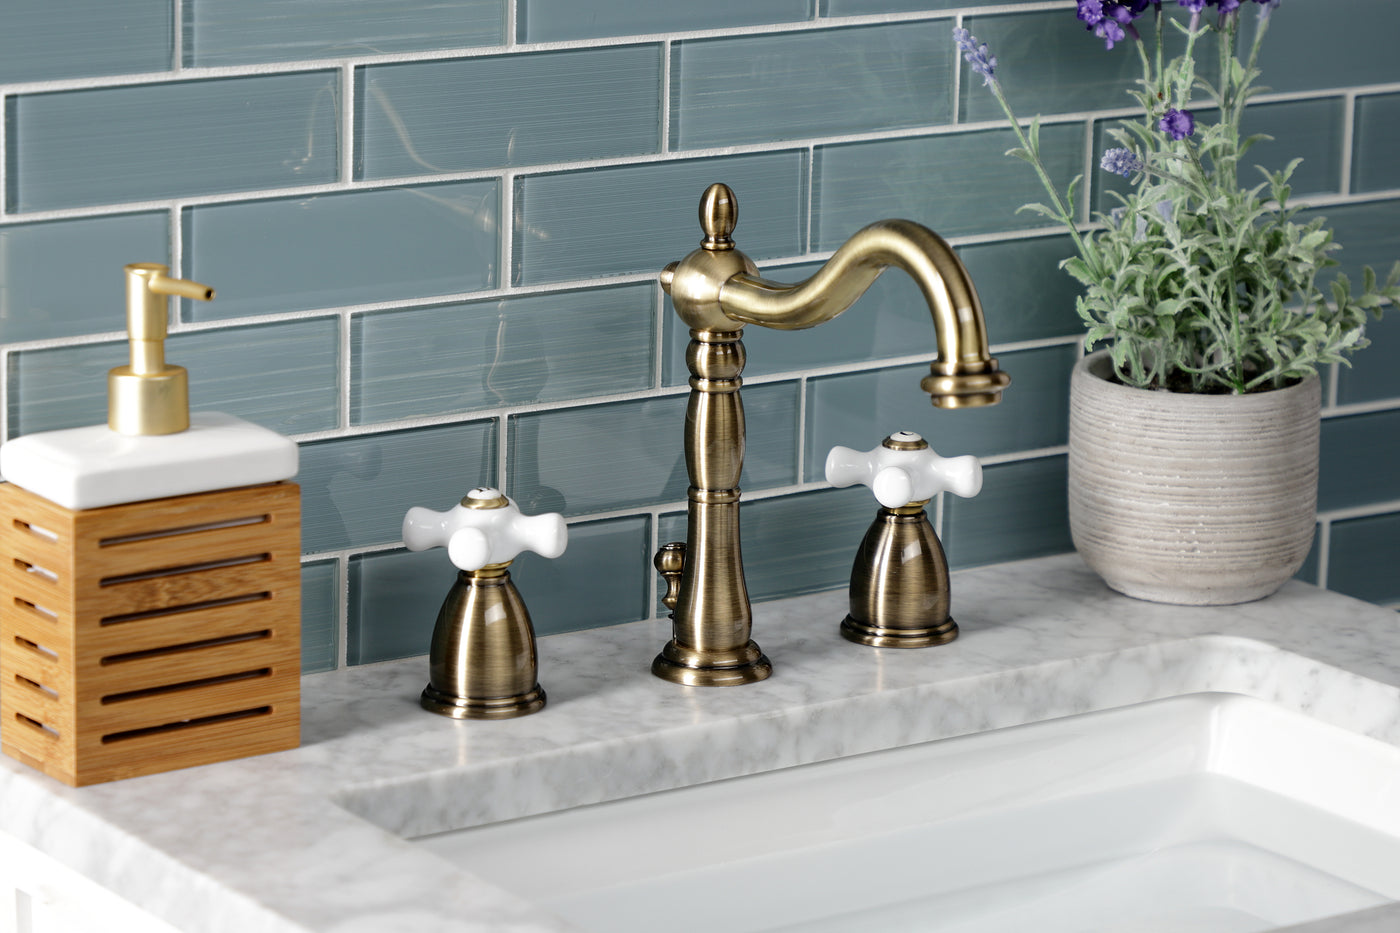 Elements of Design EB1973PX Widespread Bathroom Faucet with Brass Pop-Up, Antique Brass